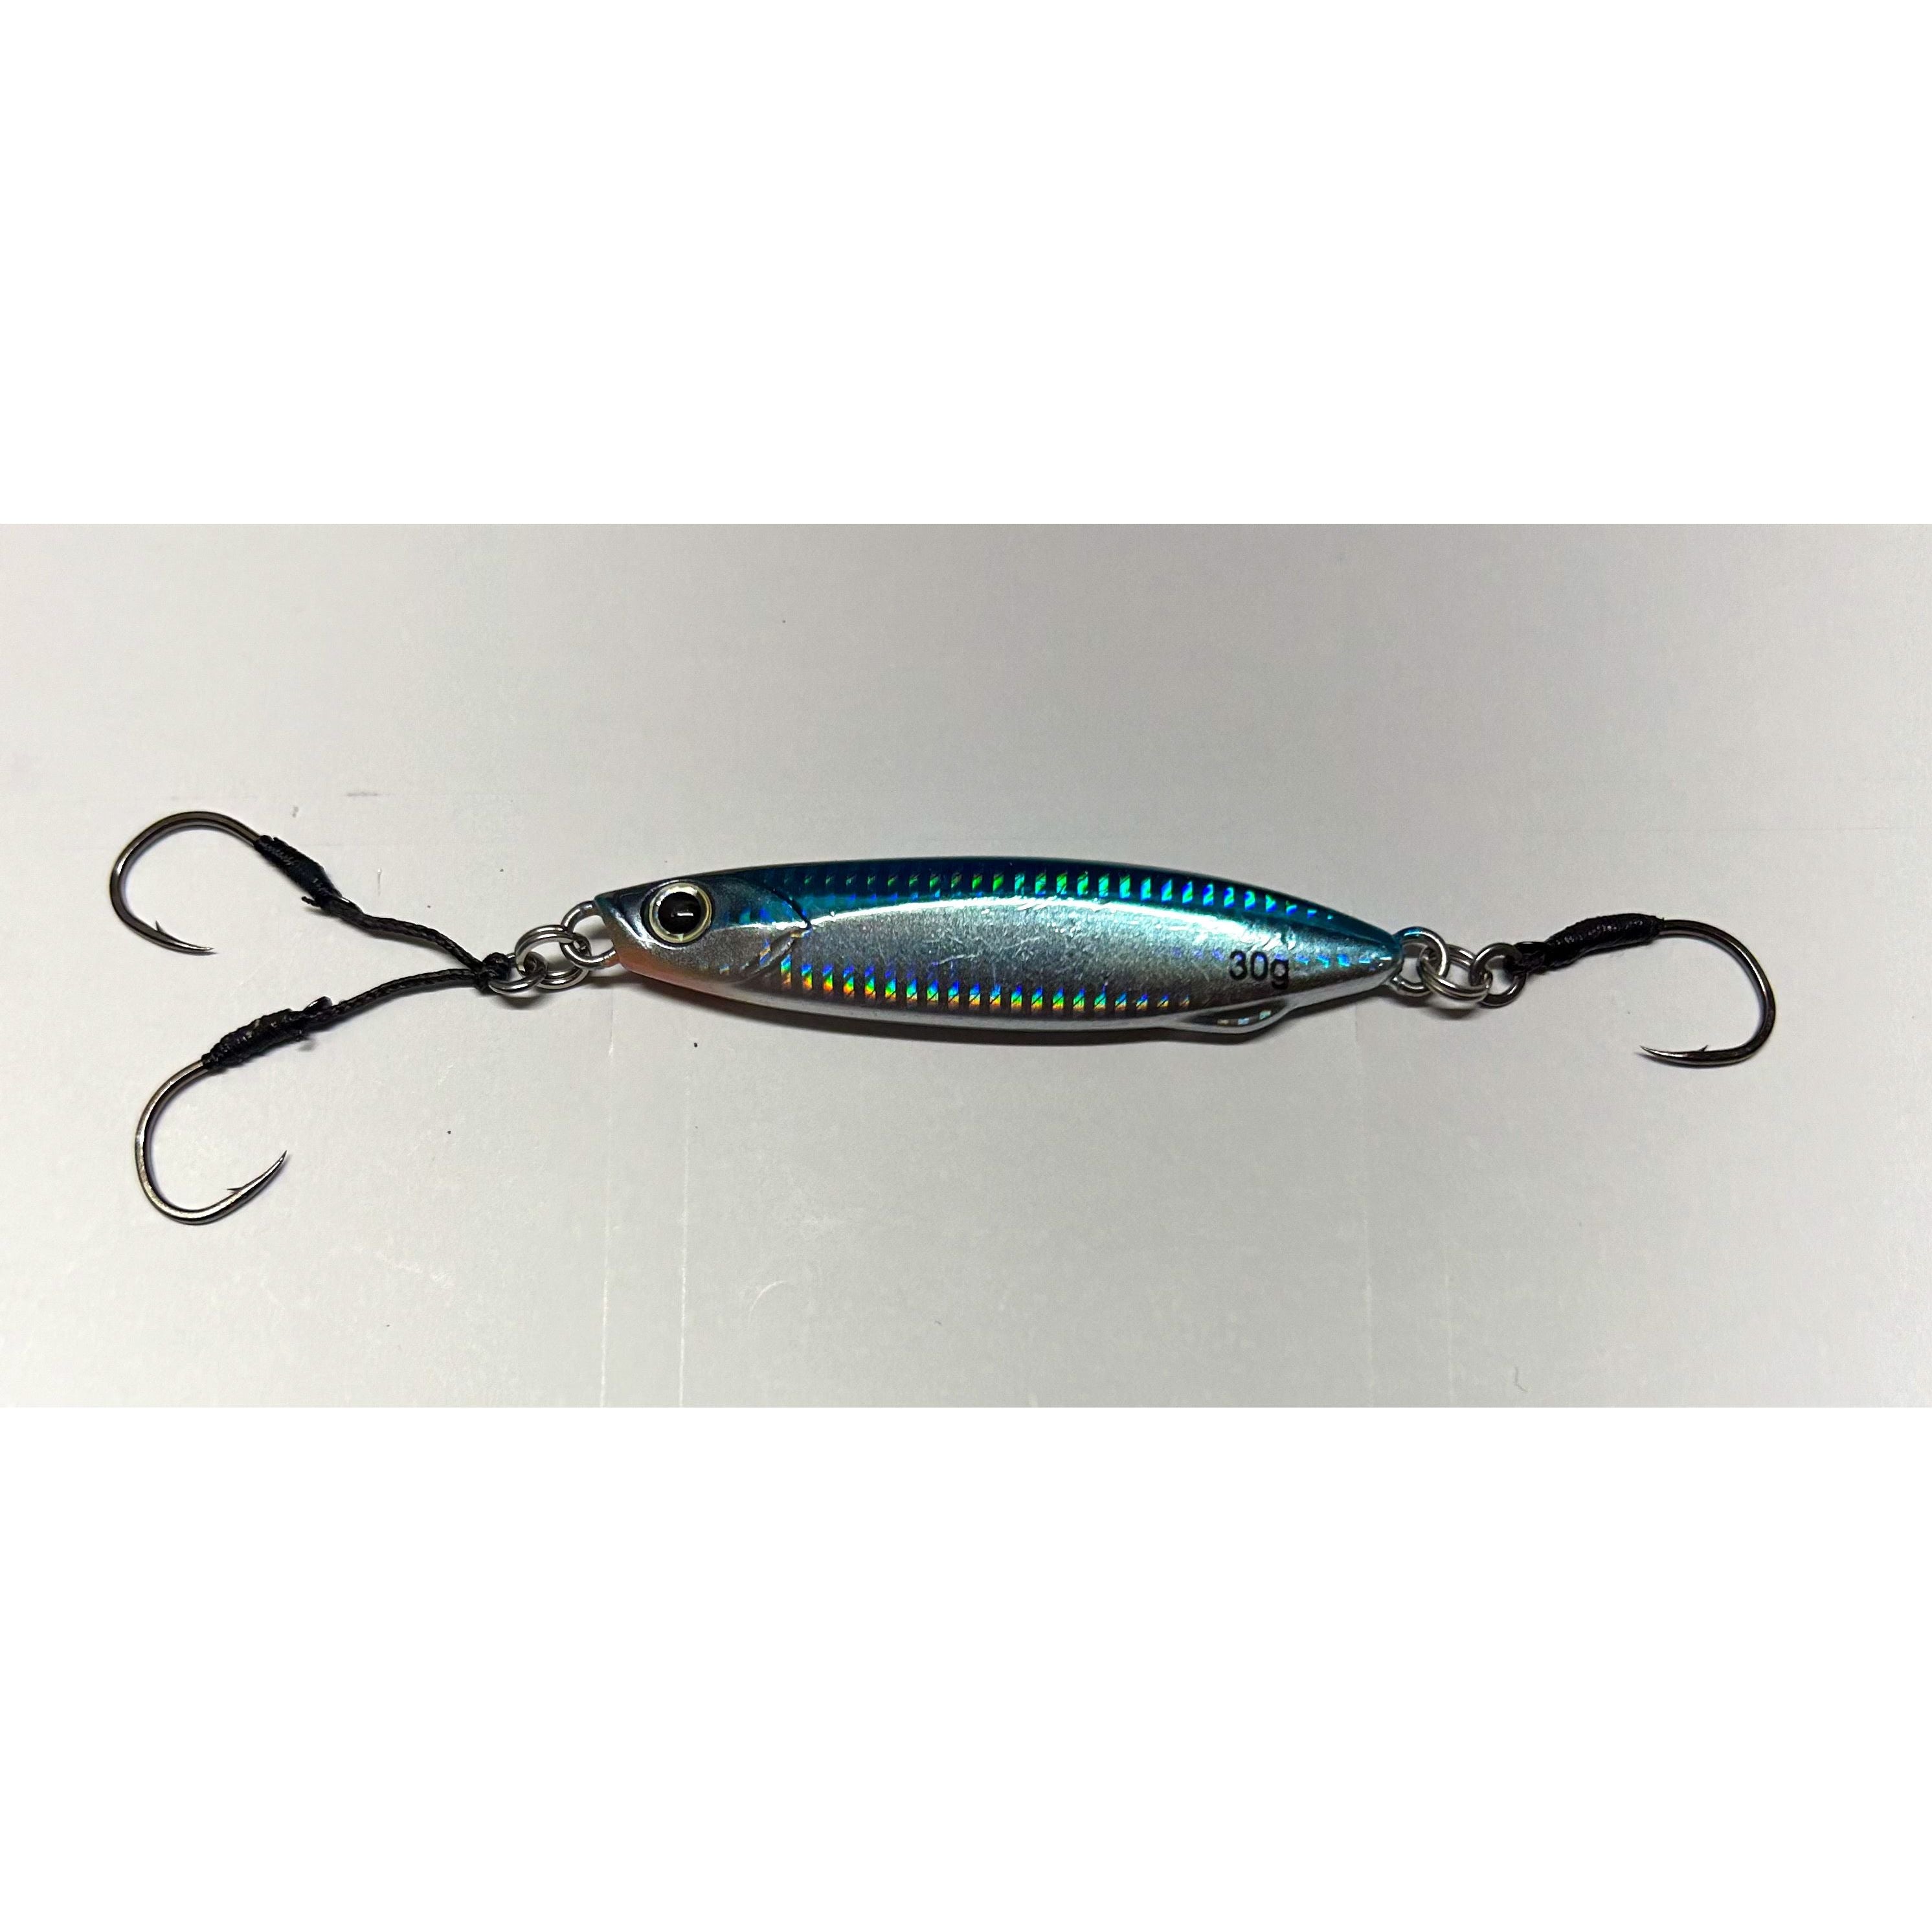 Small Slow Jigs (20g & 30g)